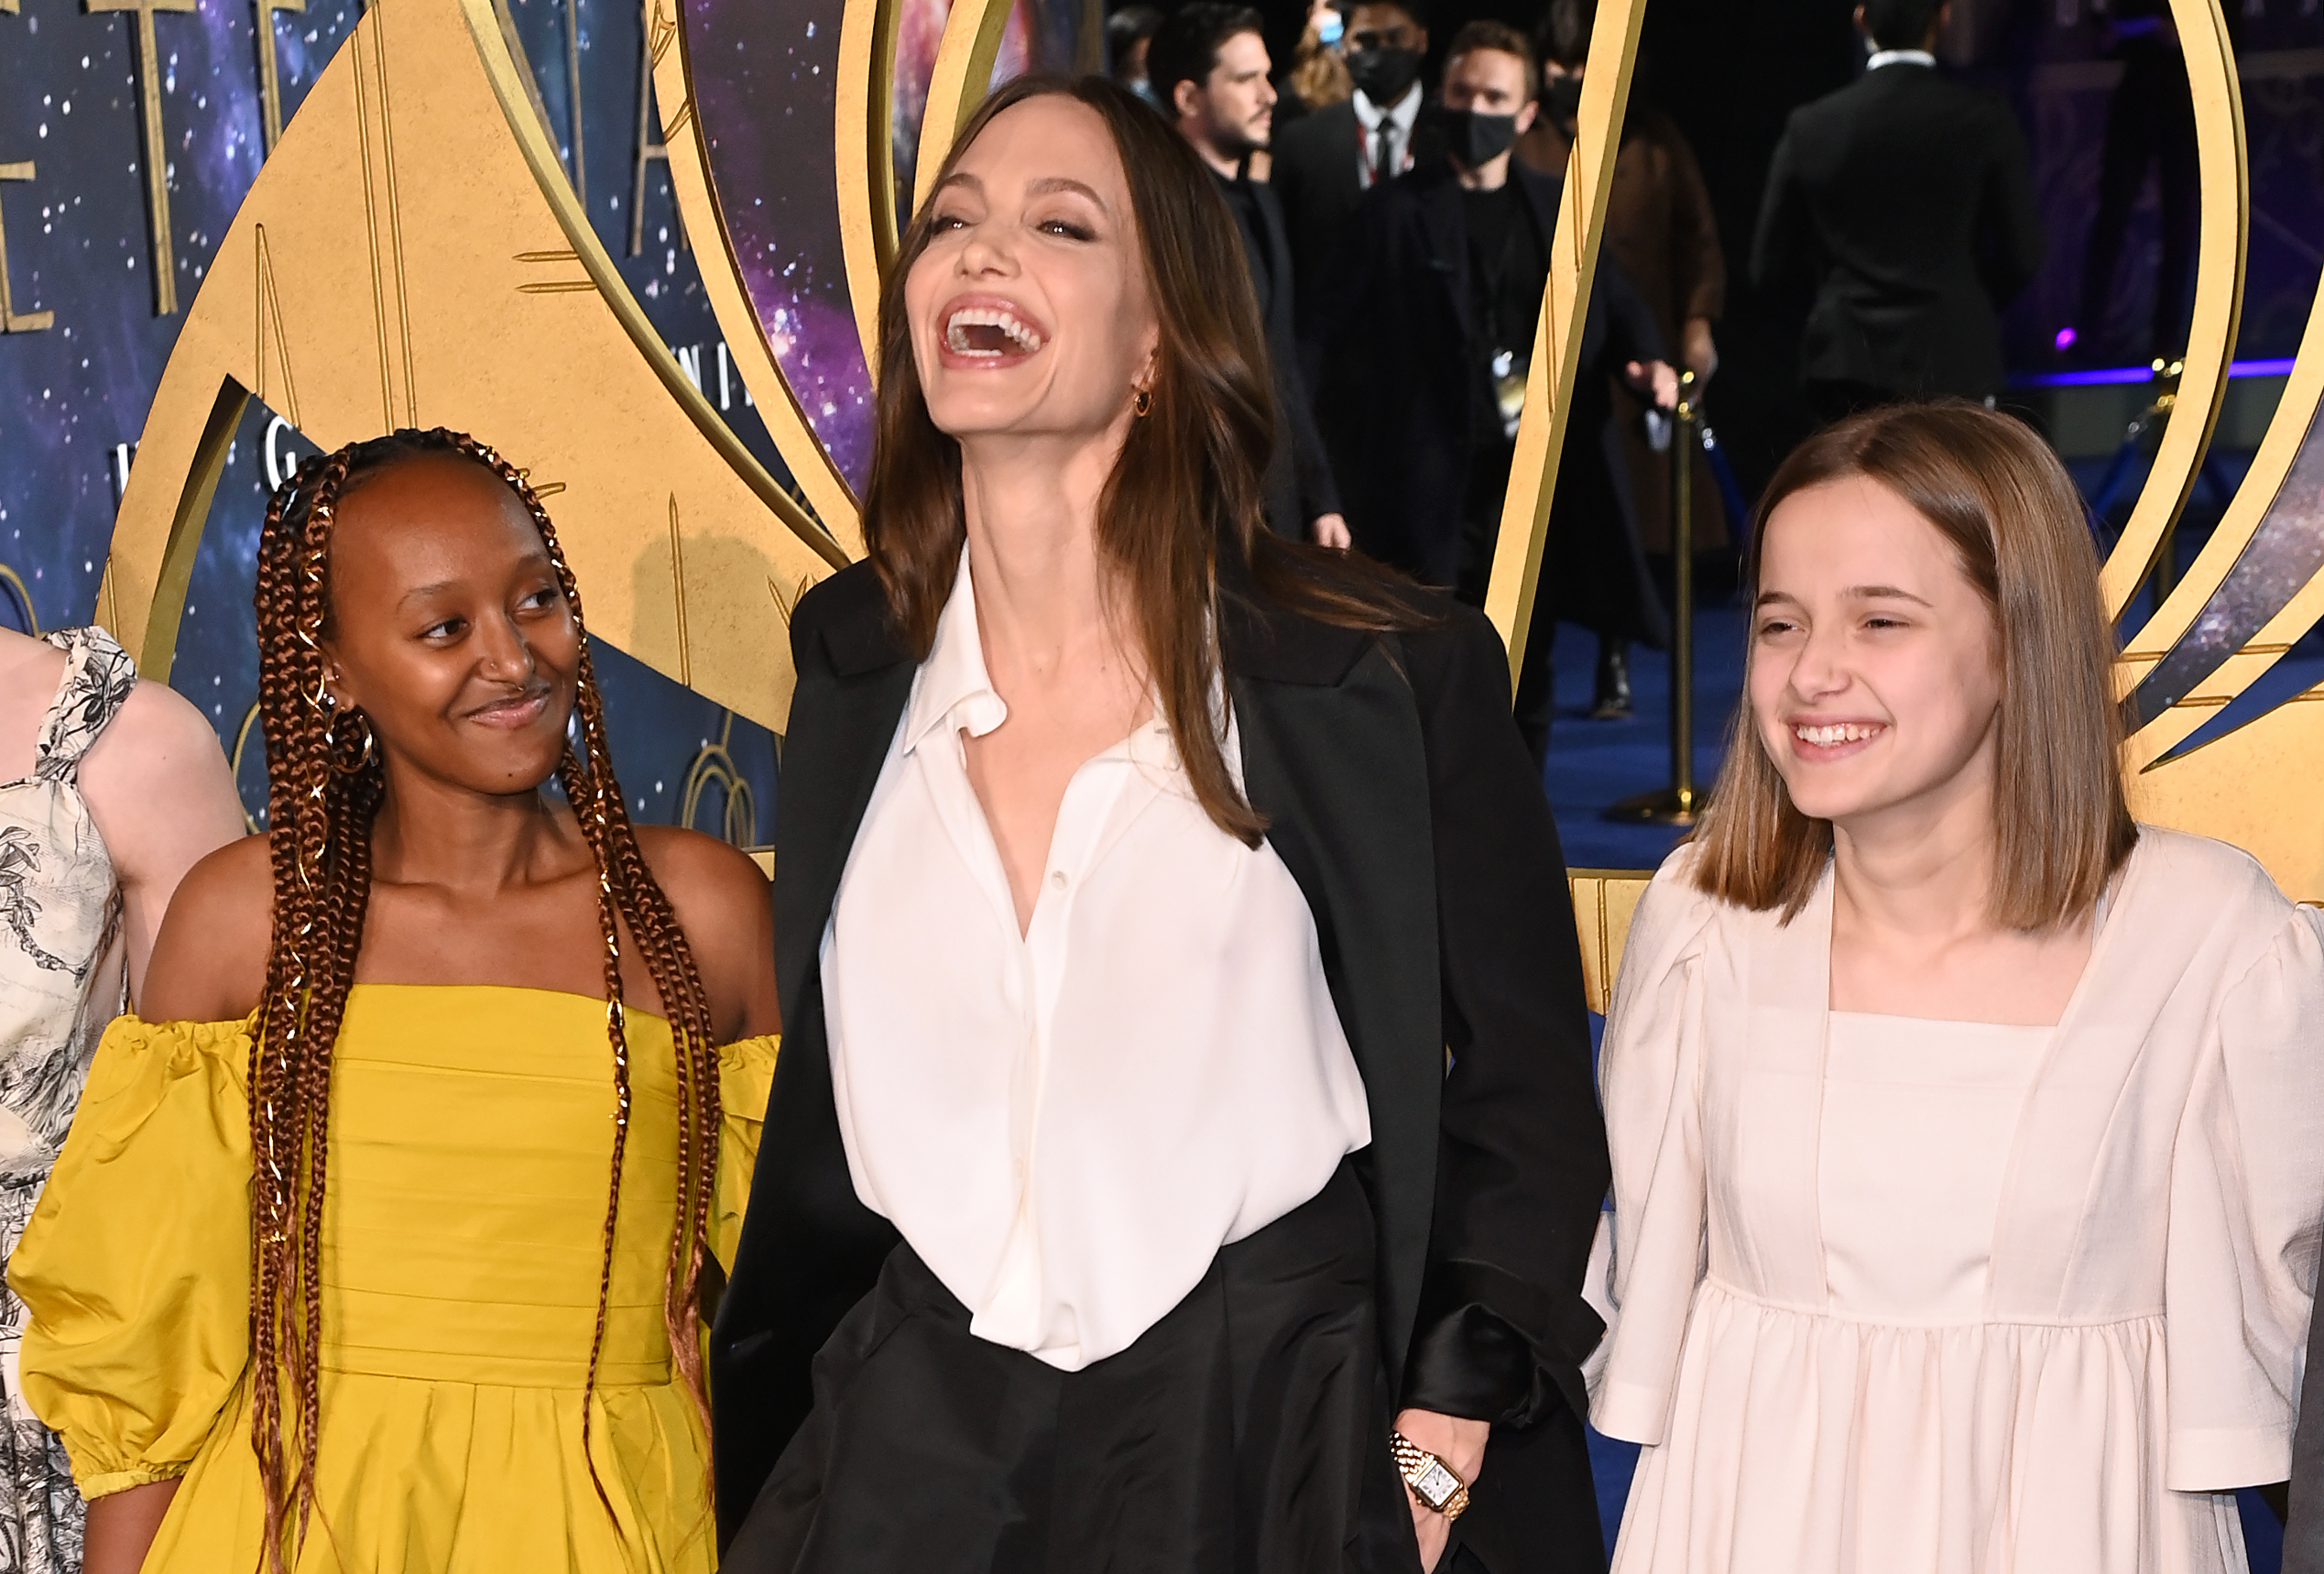 Zahara, Angelina Jolie, and Vivienne Jolie-Pitt attend the "The Eternals" UK Premiere at BFI IMAX Waterloo in London, England, on October 27, 2021. | Source: Getty Images